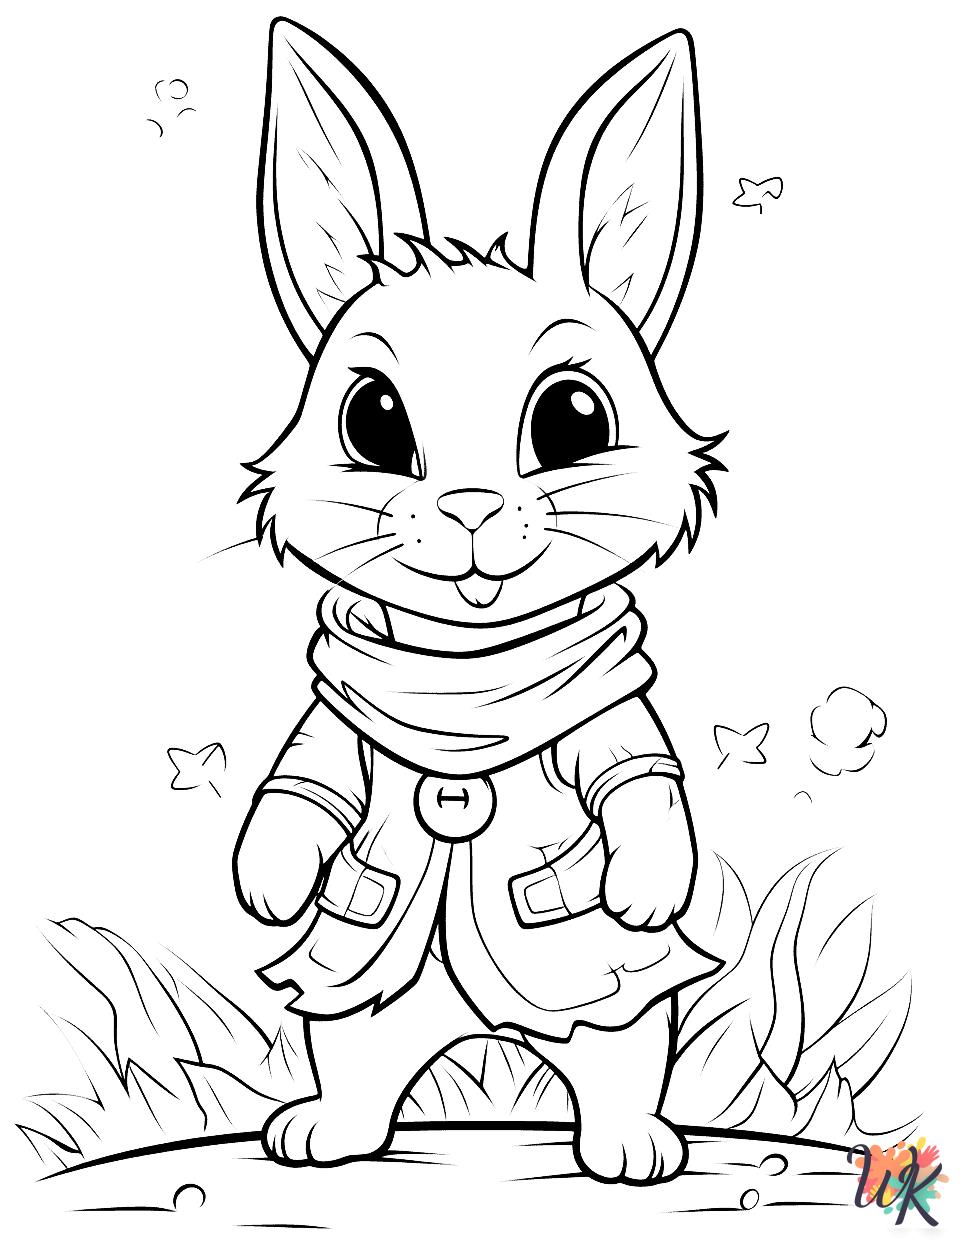 Rabbits coloring pages free